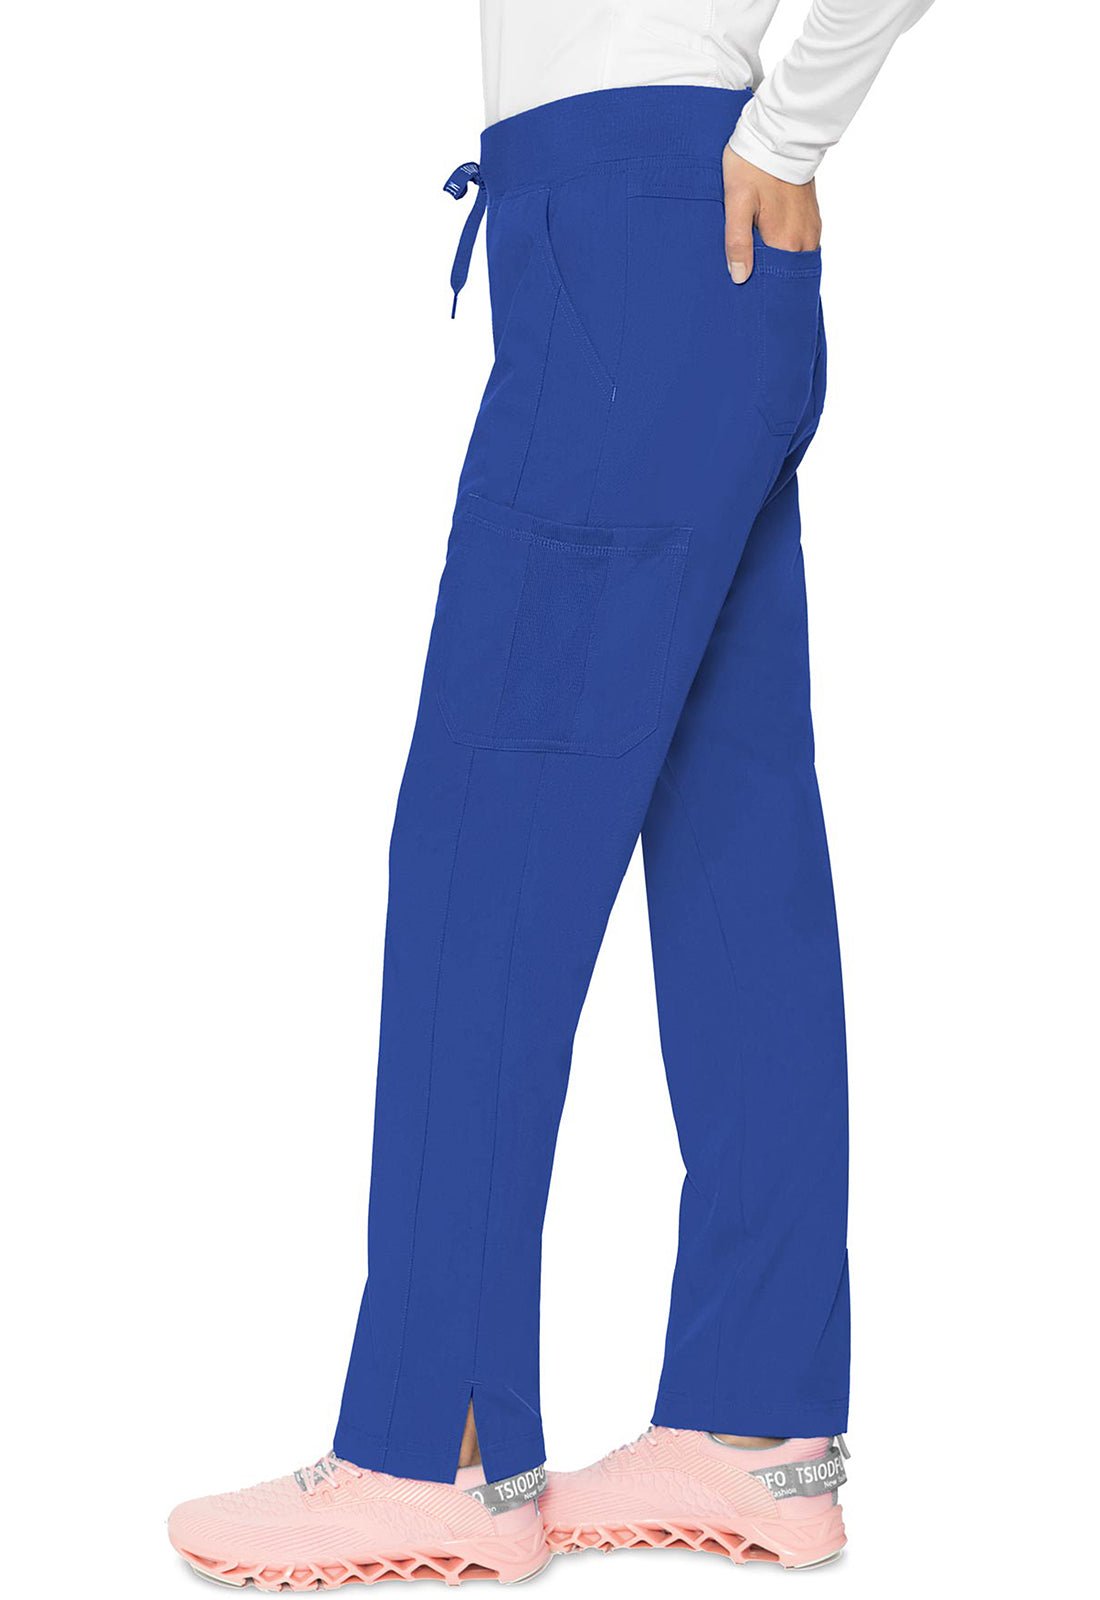 Med Couture Touch Jersey Waist Yoga Scrub Pant MC7725 in Black, Navy, Pewter, Royal - Scrubs Select